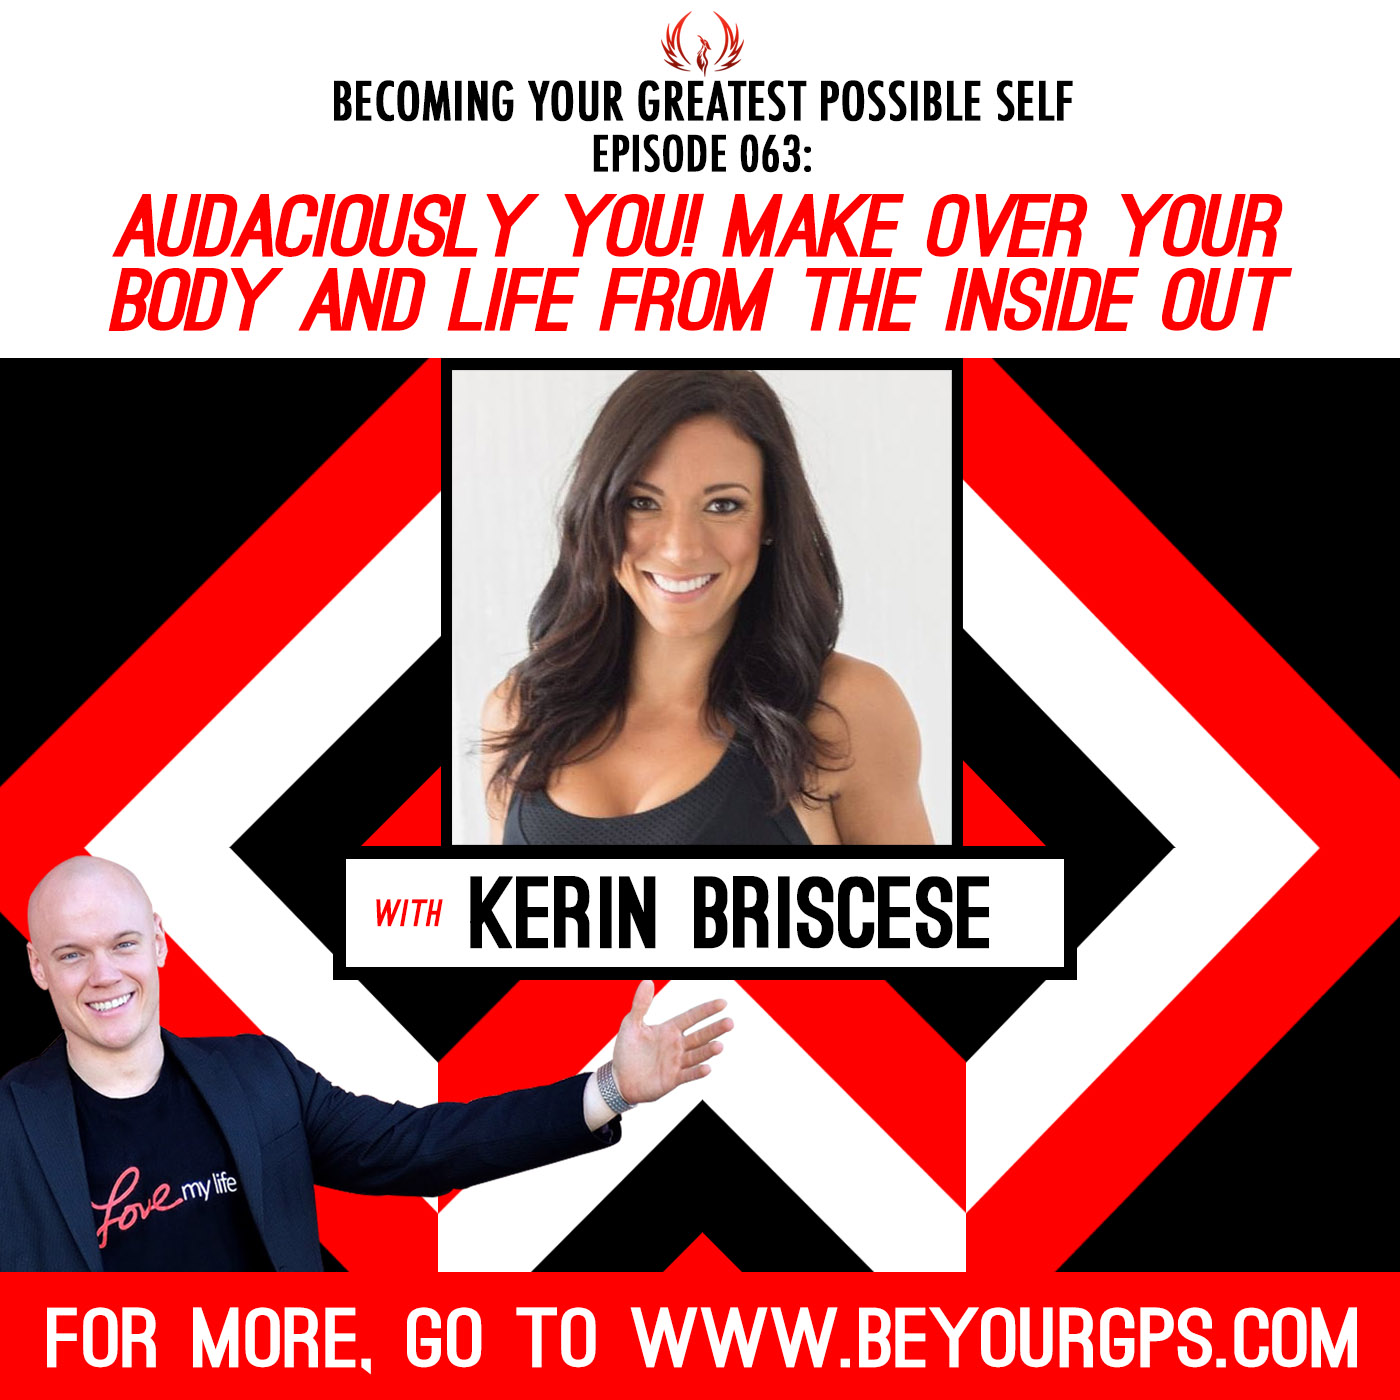 Audaciously You! Make Over Your Body & Life From The Inside Out With Kerin Briscese